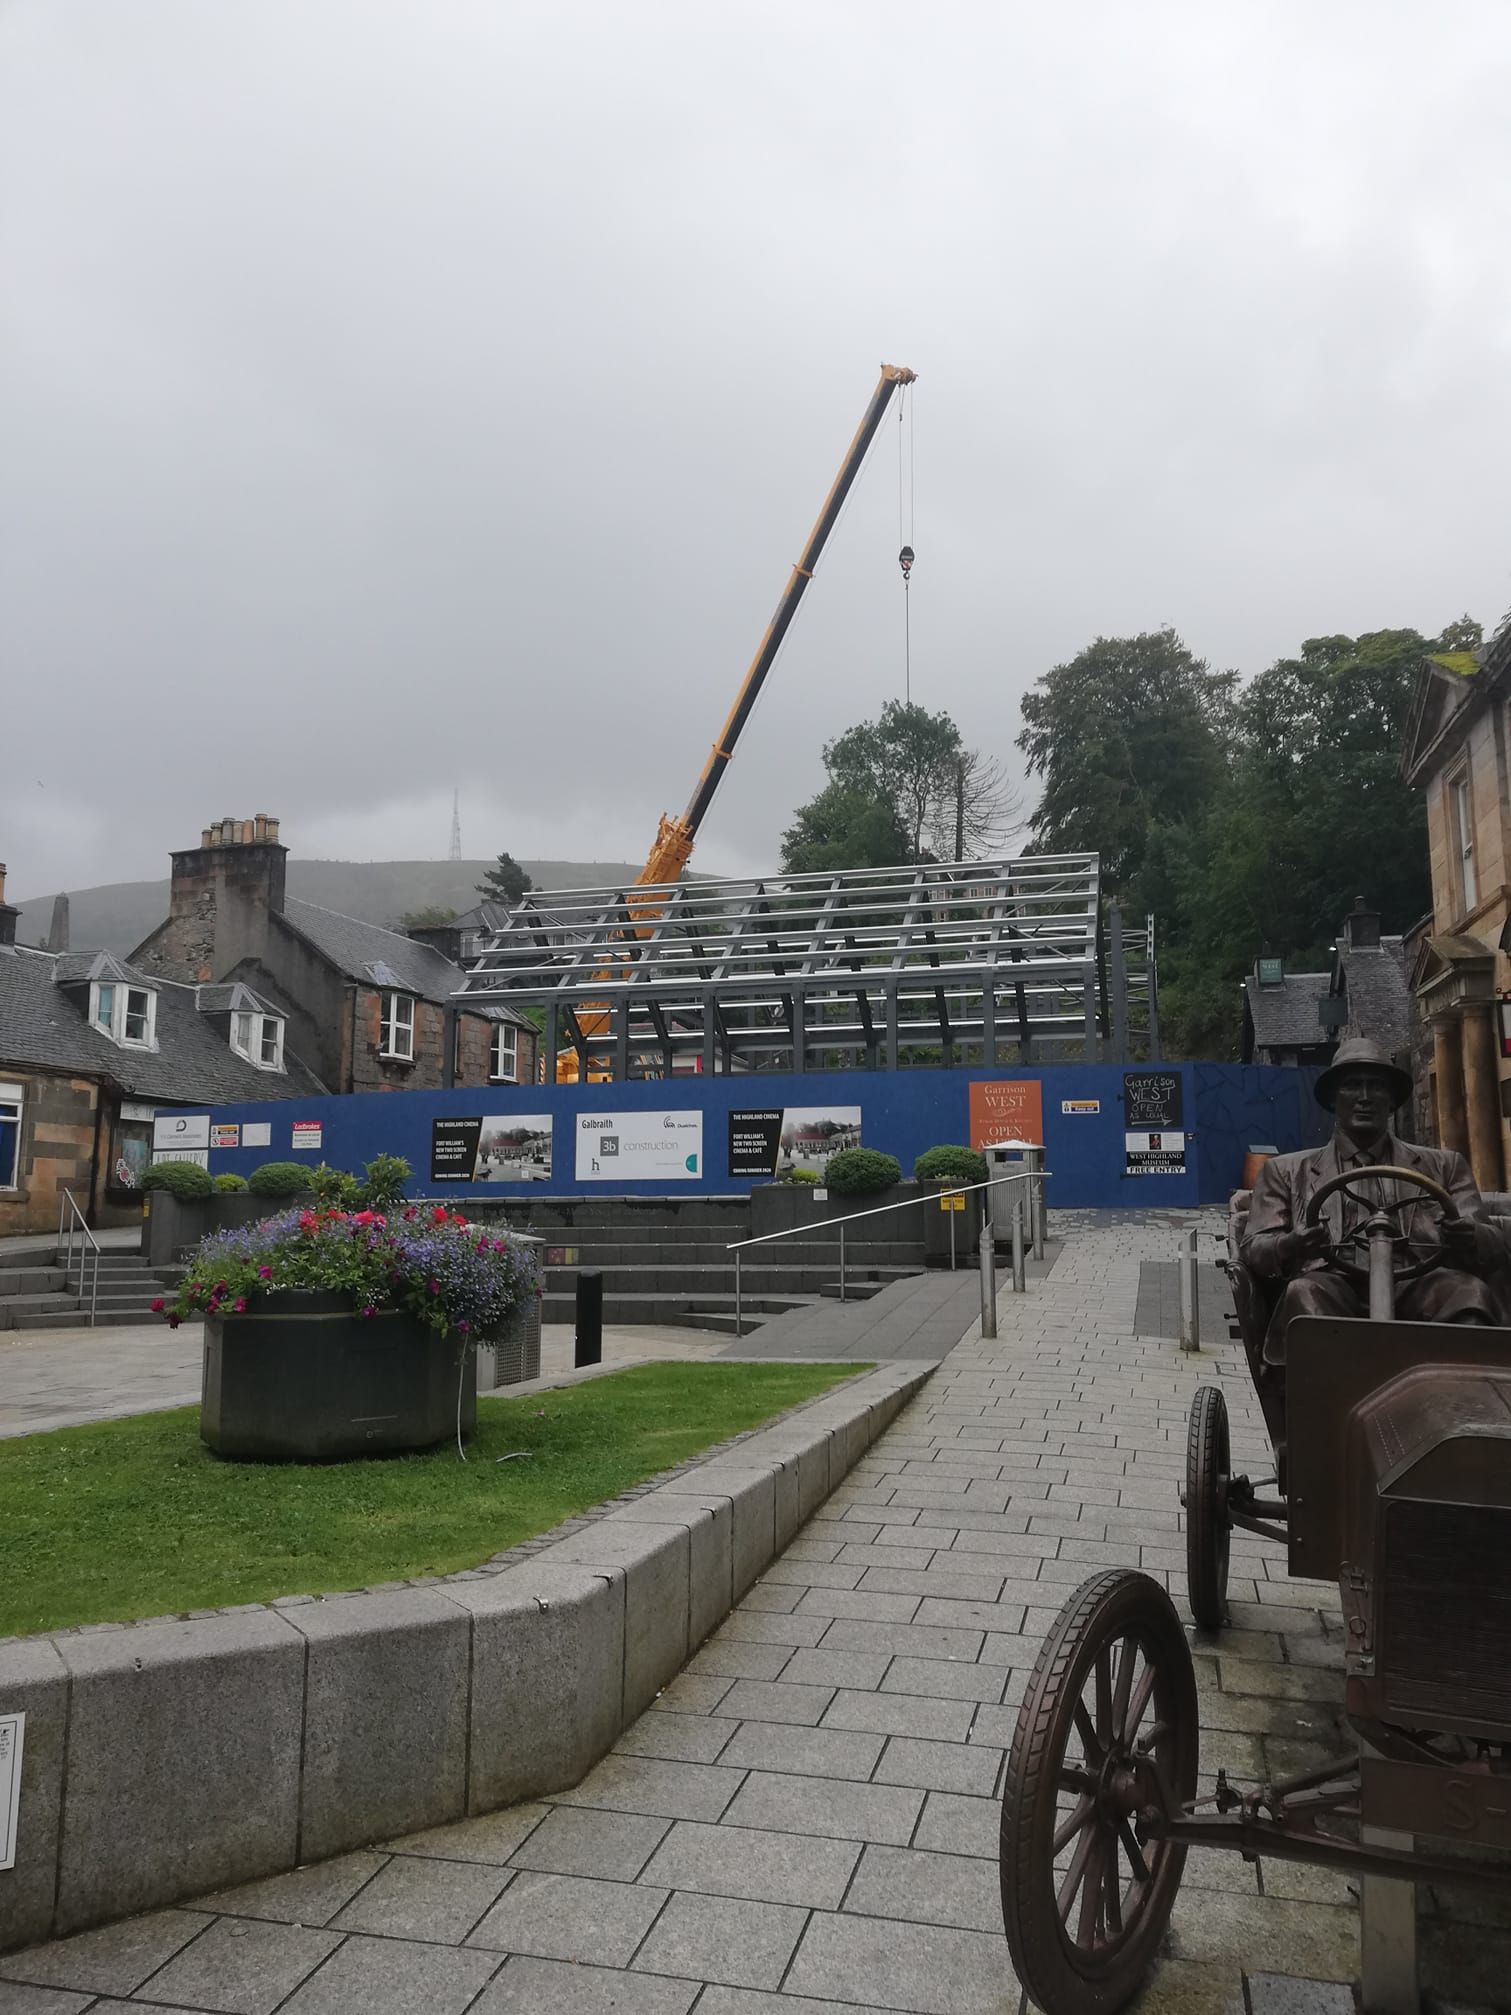 Construction of the new Fort William cinema is on schedule, with the grand opening planned for May next year